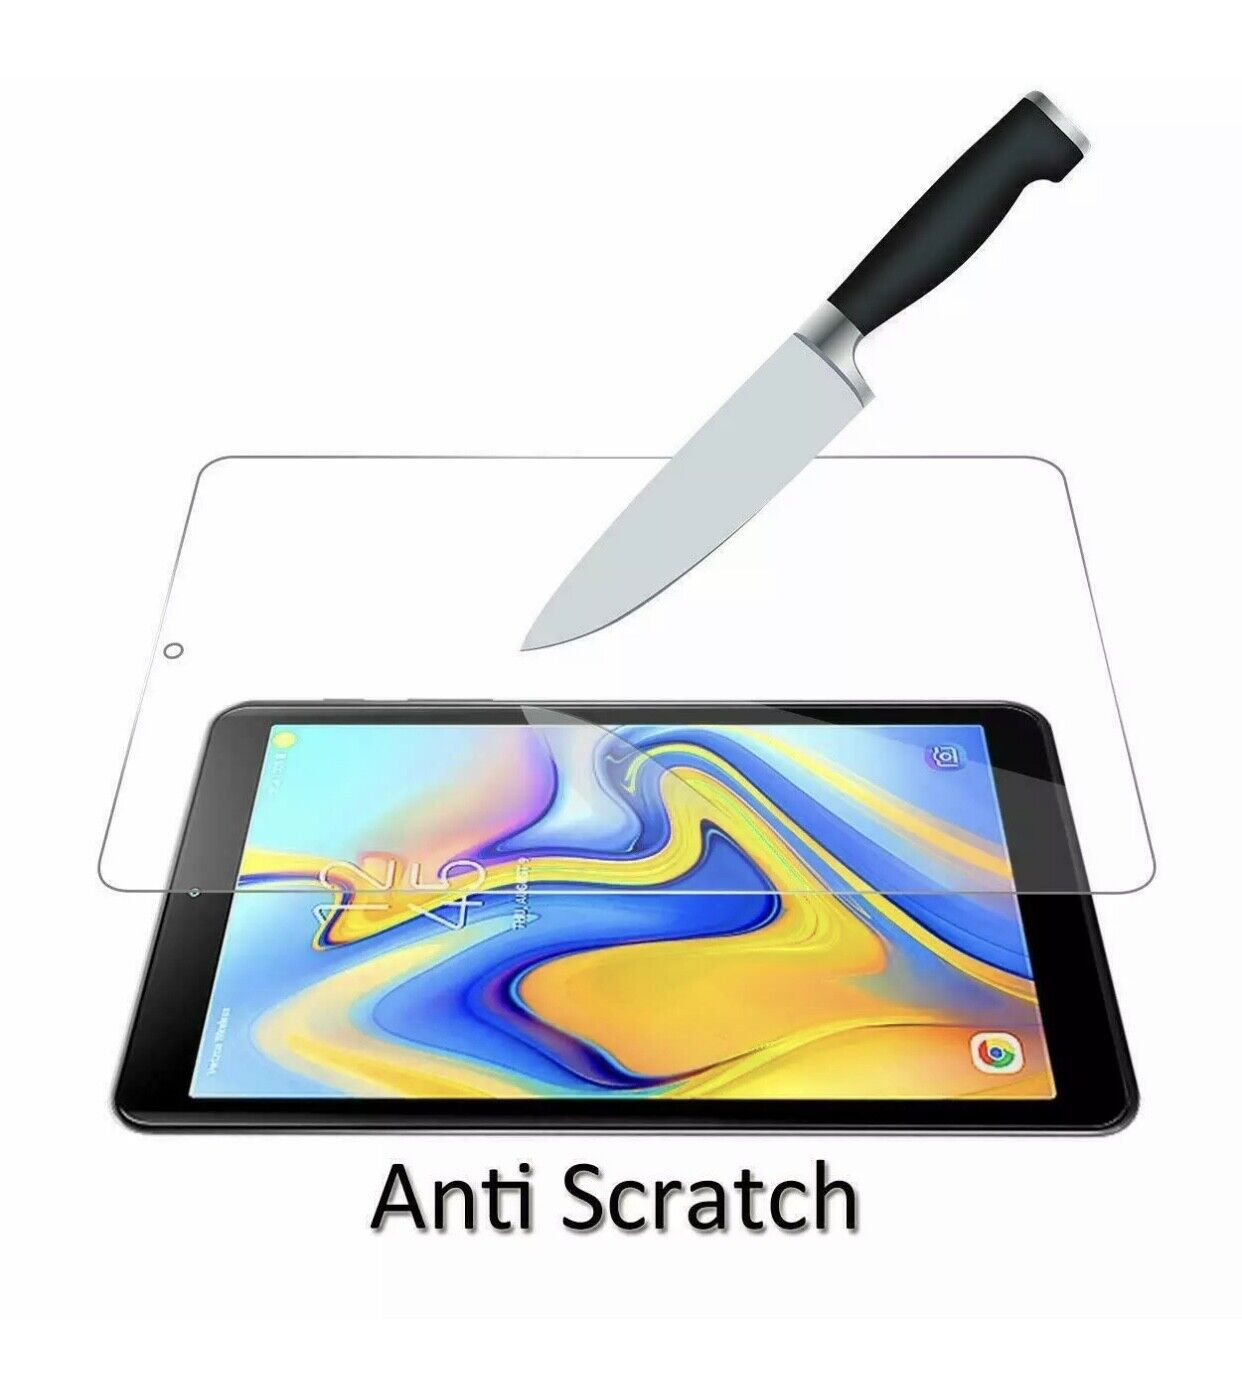 3 PACK Tempered Glass Screen Protector for Samsung Galaxy Tab A 8.0 2018 SM-T387 Unbranded T387-Tempered-Glass-2pcs - фотография #2